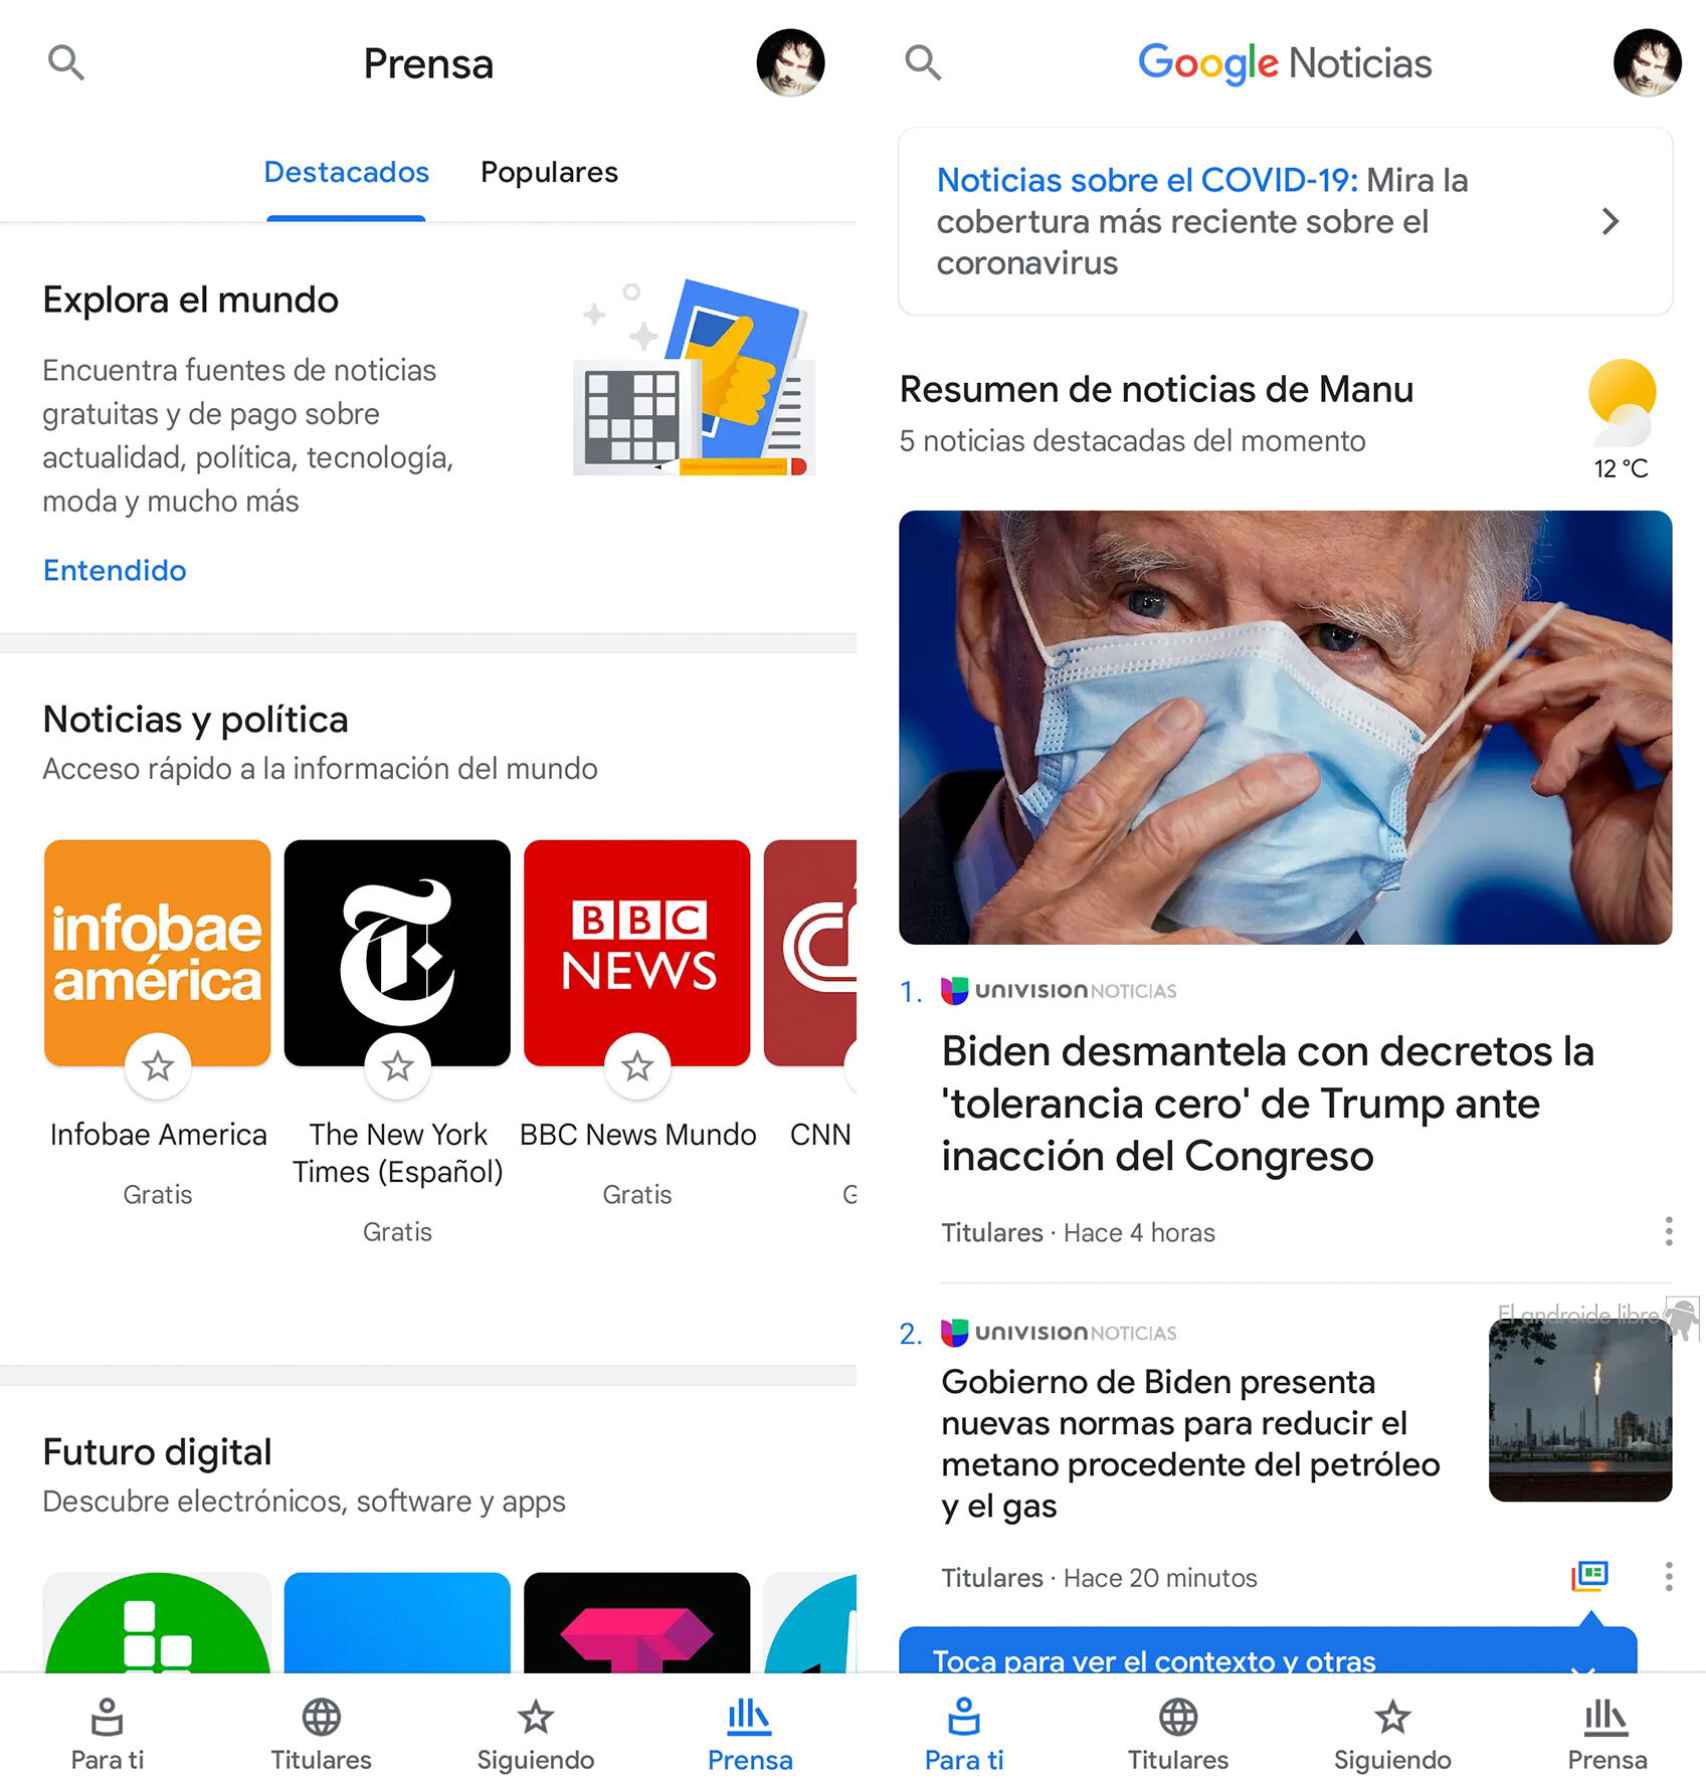 This is  the Google News app